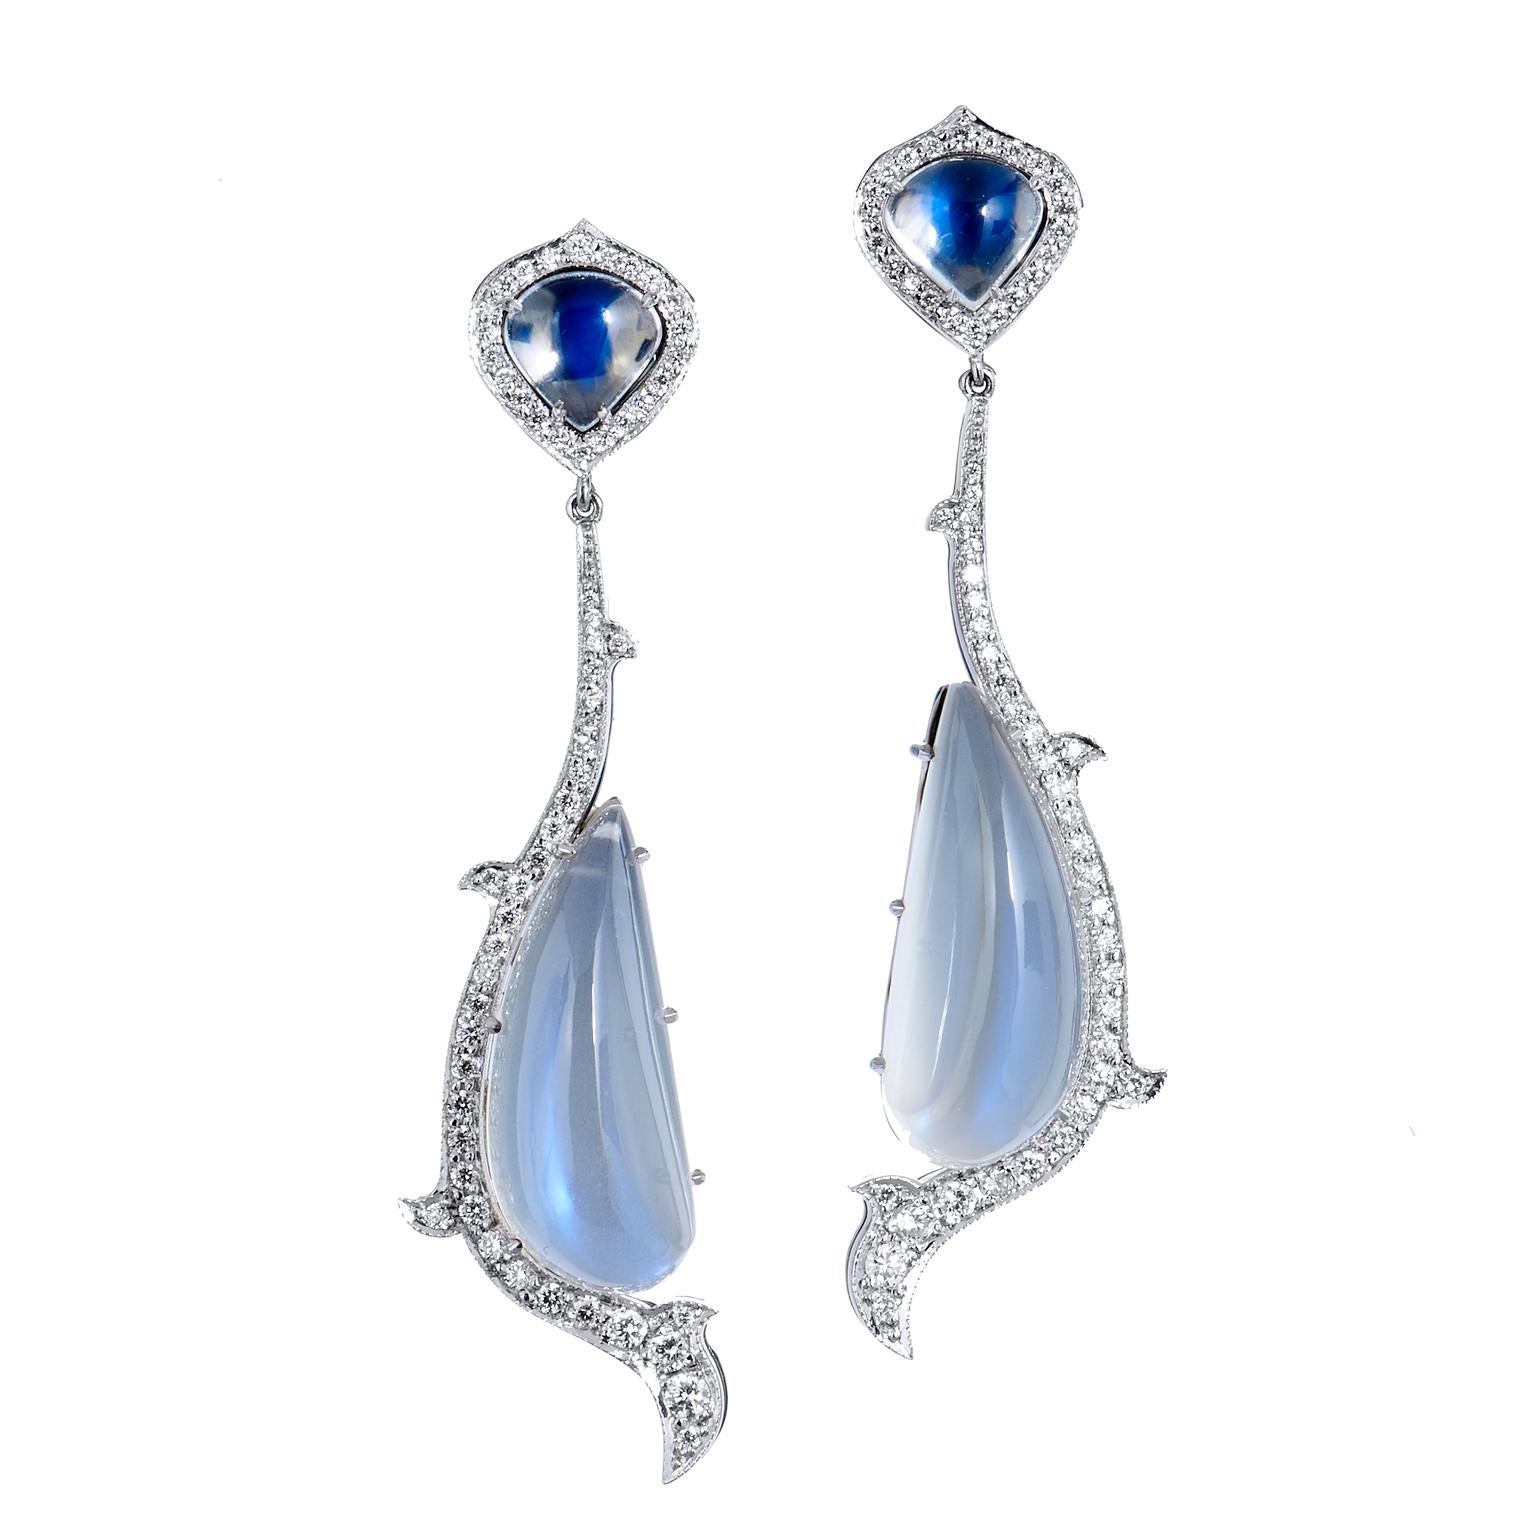 18kt White Gold Moonstone and Diamond Drop Earrings Handmade 

Known for its enchanting dance with light, the moonstone is a playful and intriguing stone that translates beautifully into jewelry design. Handmade in 18kt white gold, this set of